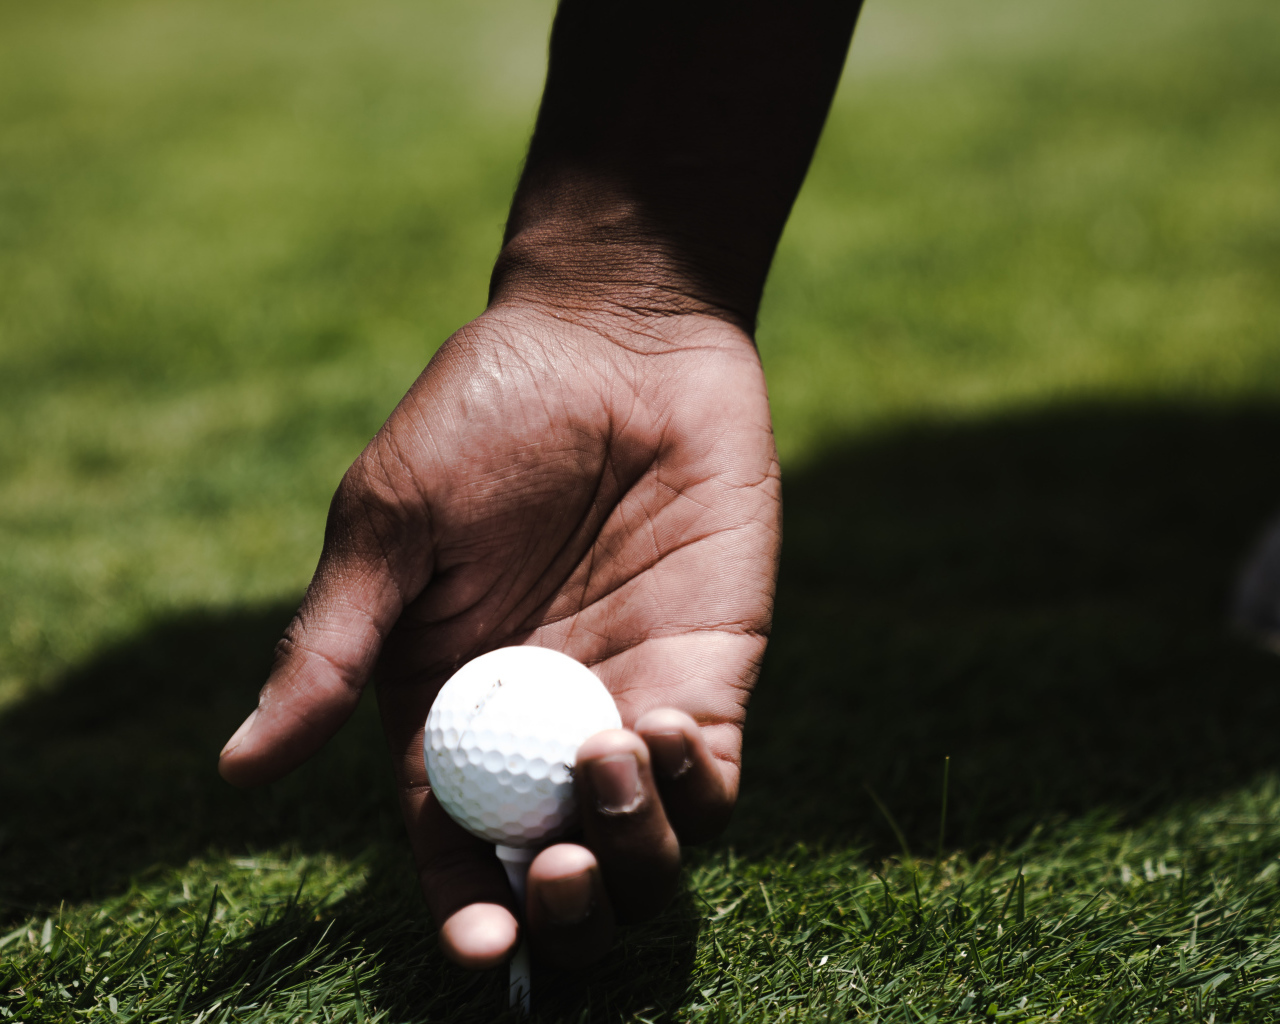 White golf ball in a man’s hand on the field